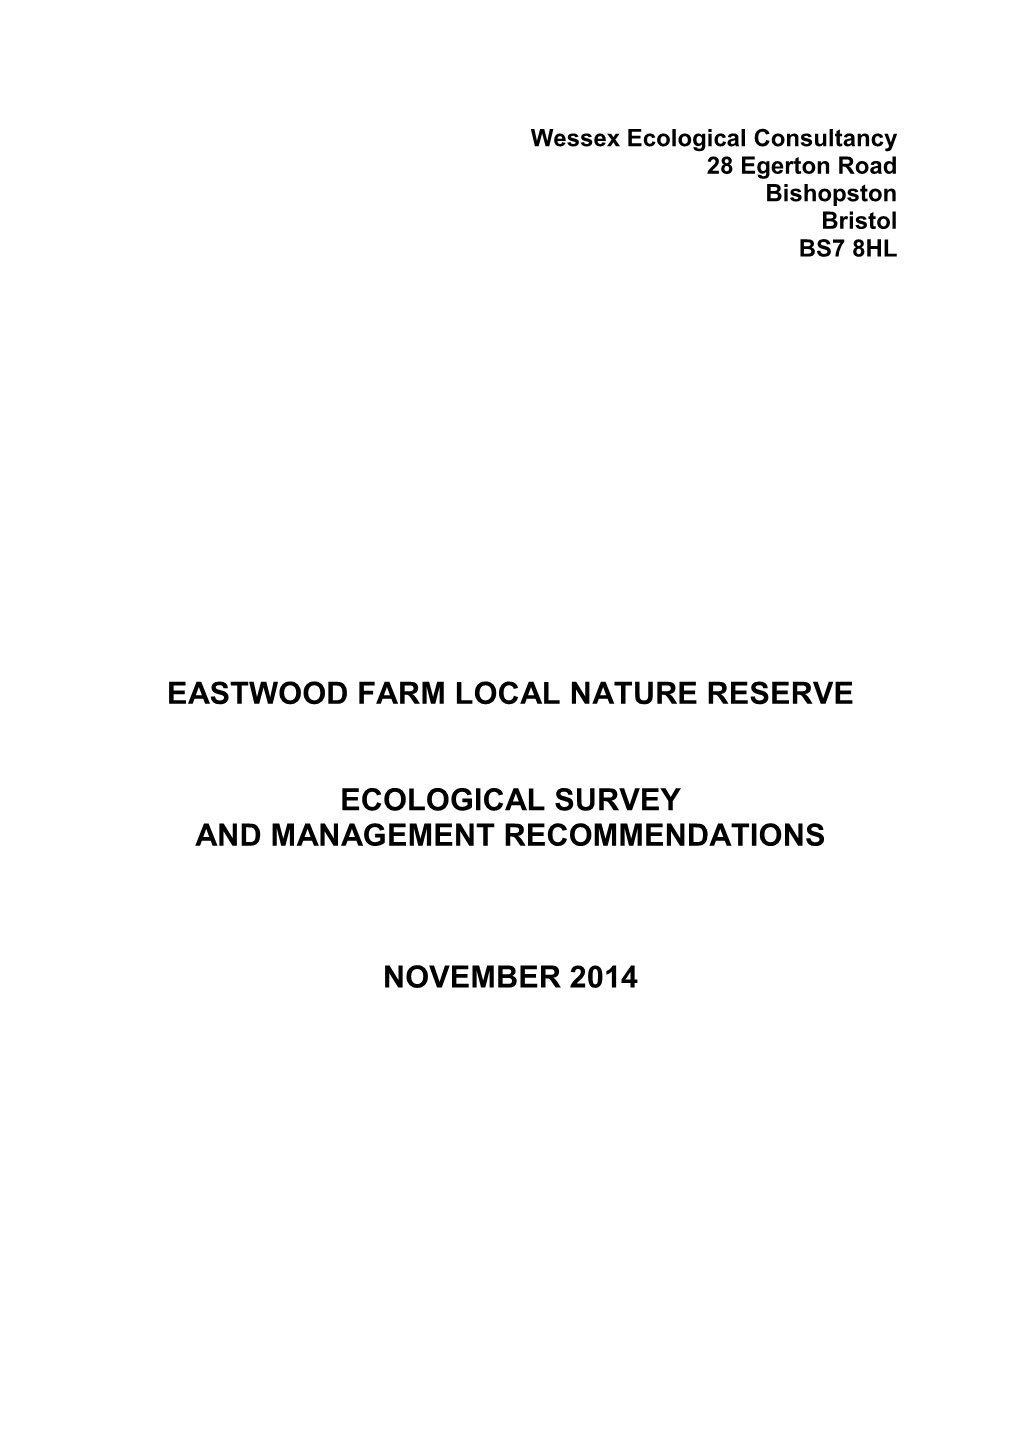 Eastwood Farm Local Nature Reserve Ecological Survey and Management